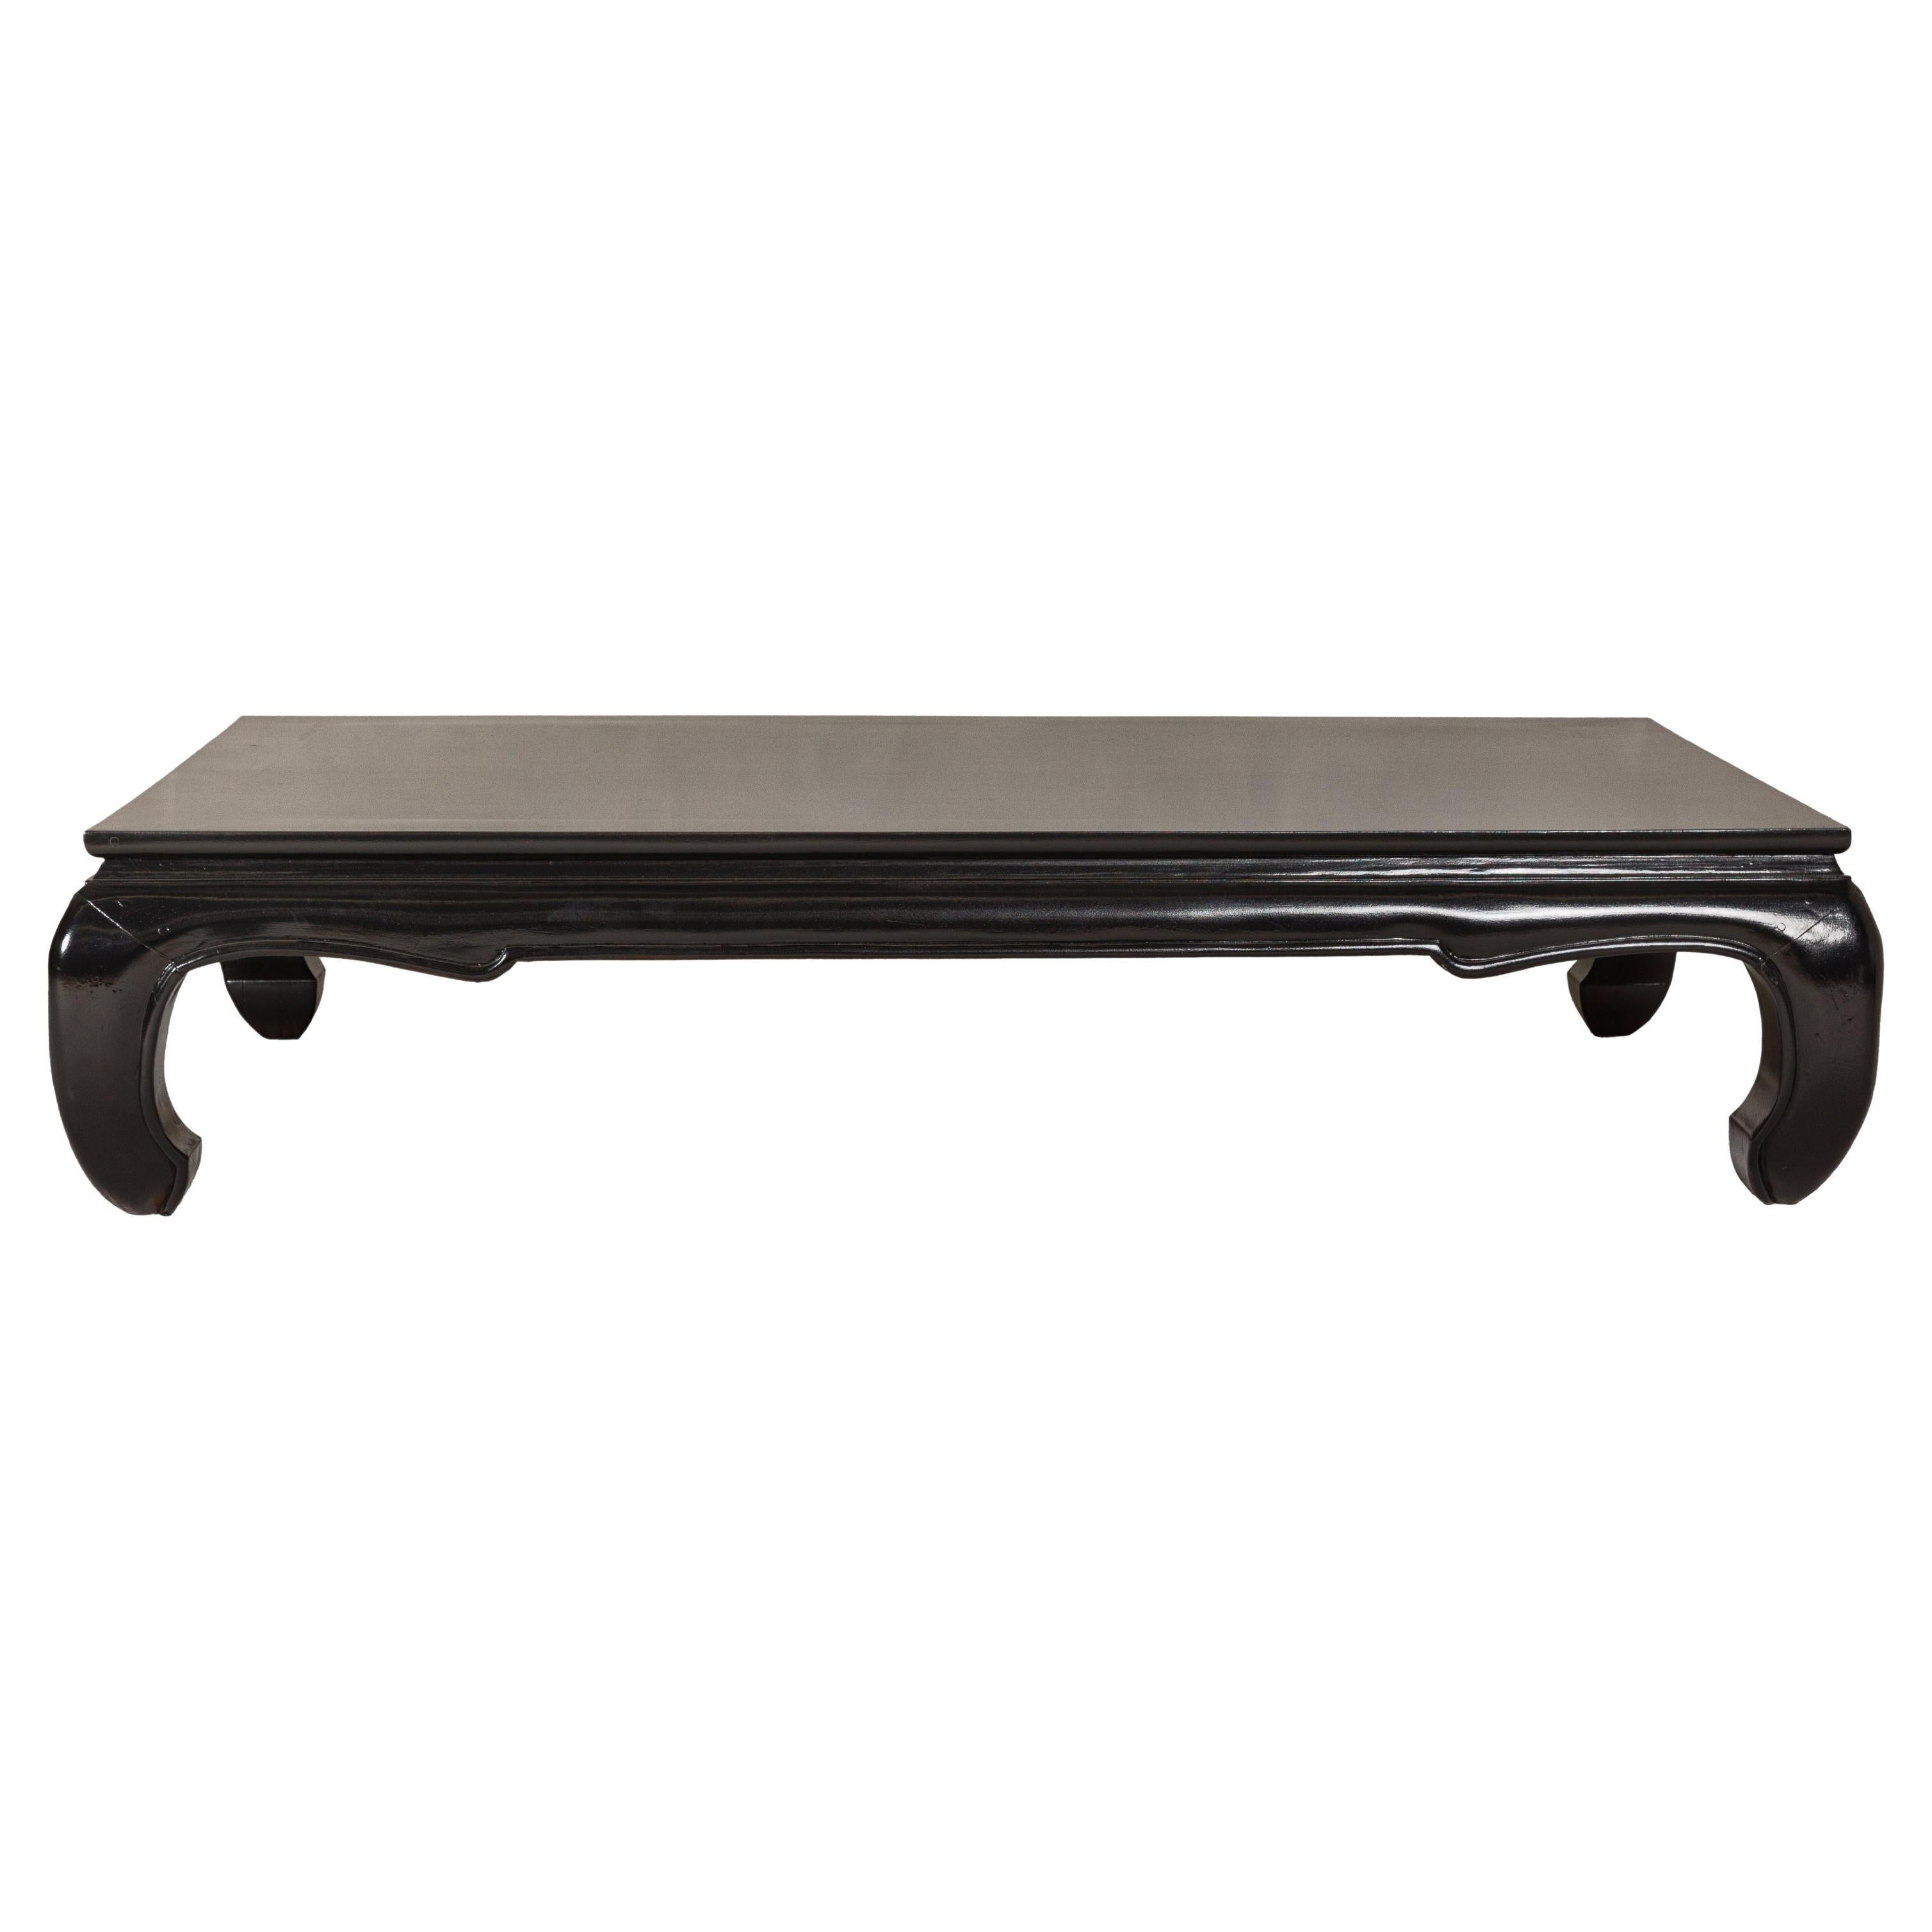 Teak Wood Chow Legs Coffee Table with Custom Black Lacquer Finish